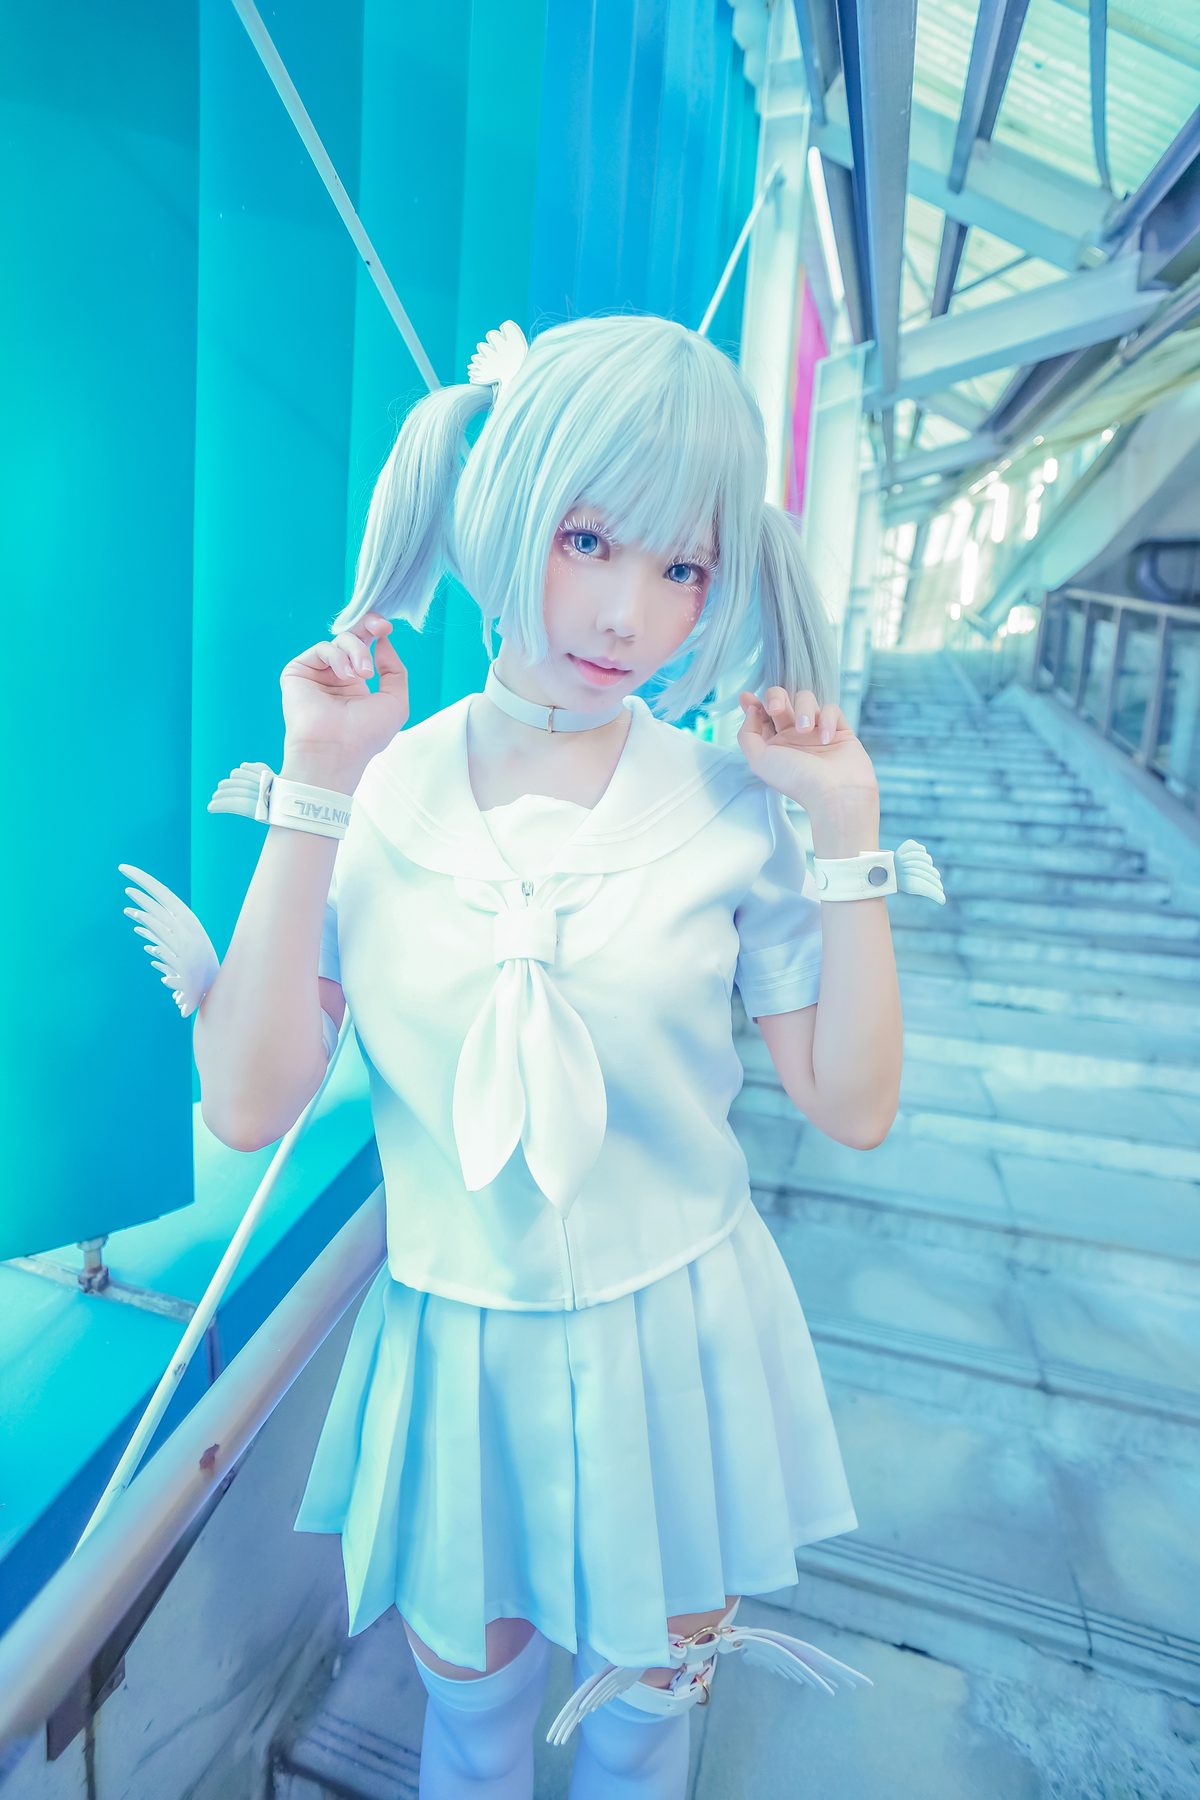 Coser@Ely_eee ElyEE子 TUESDAY TWINTAIL A 0008 7553088588.jpg